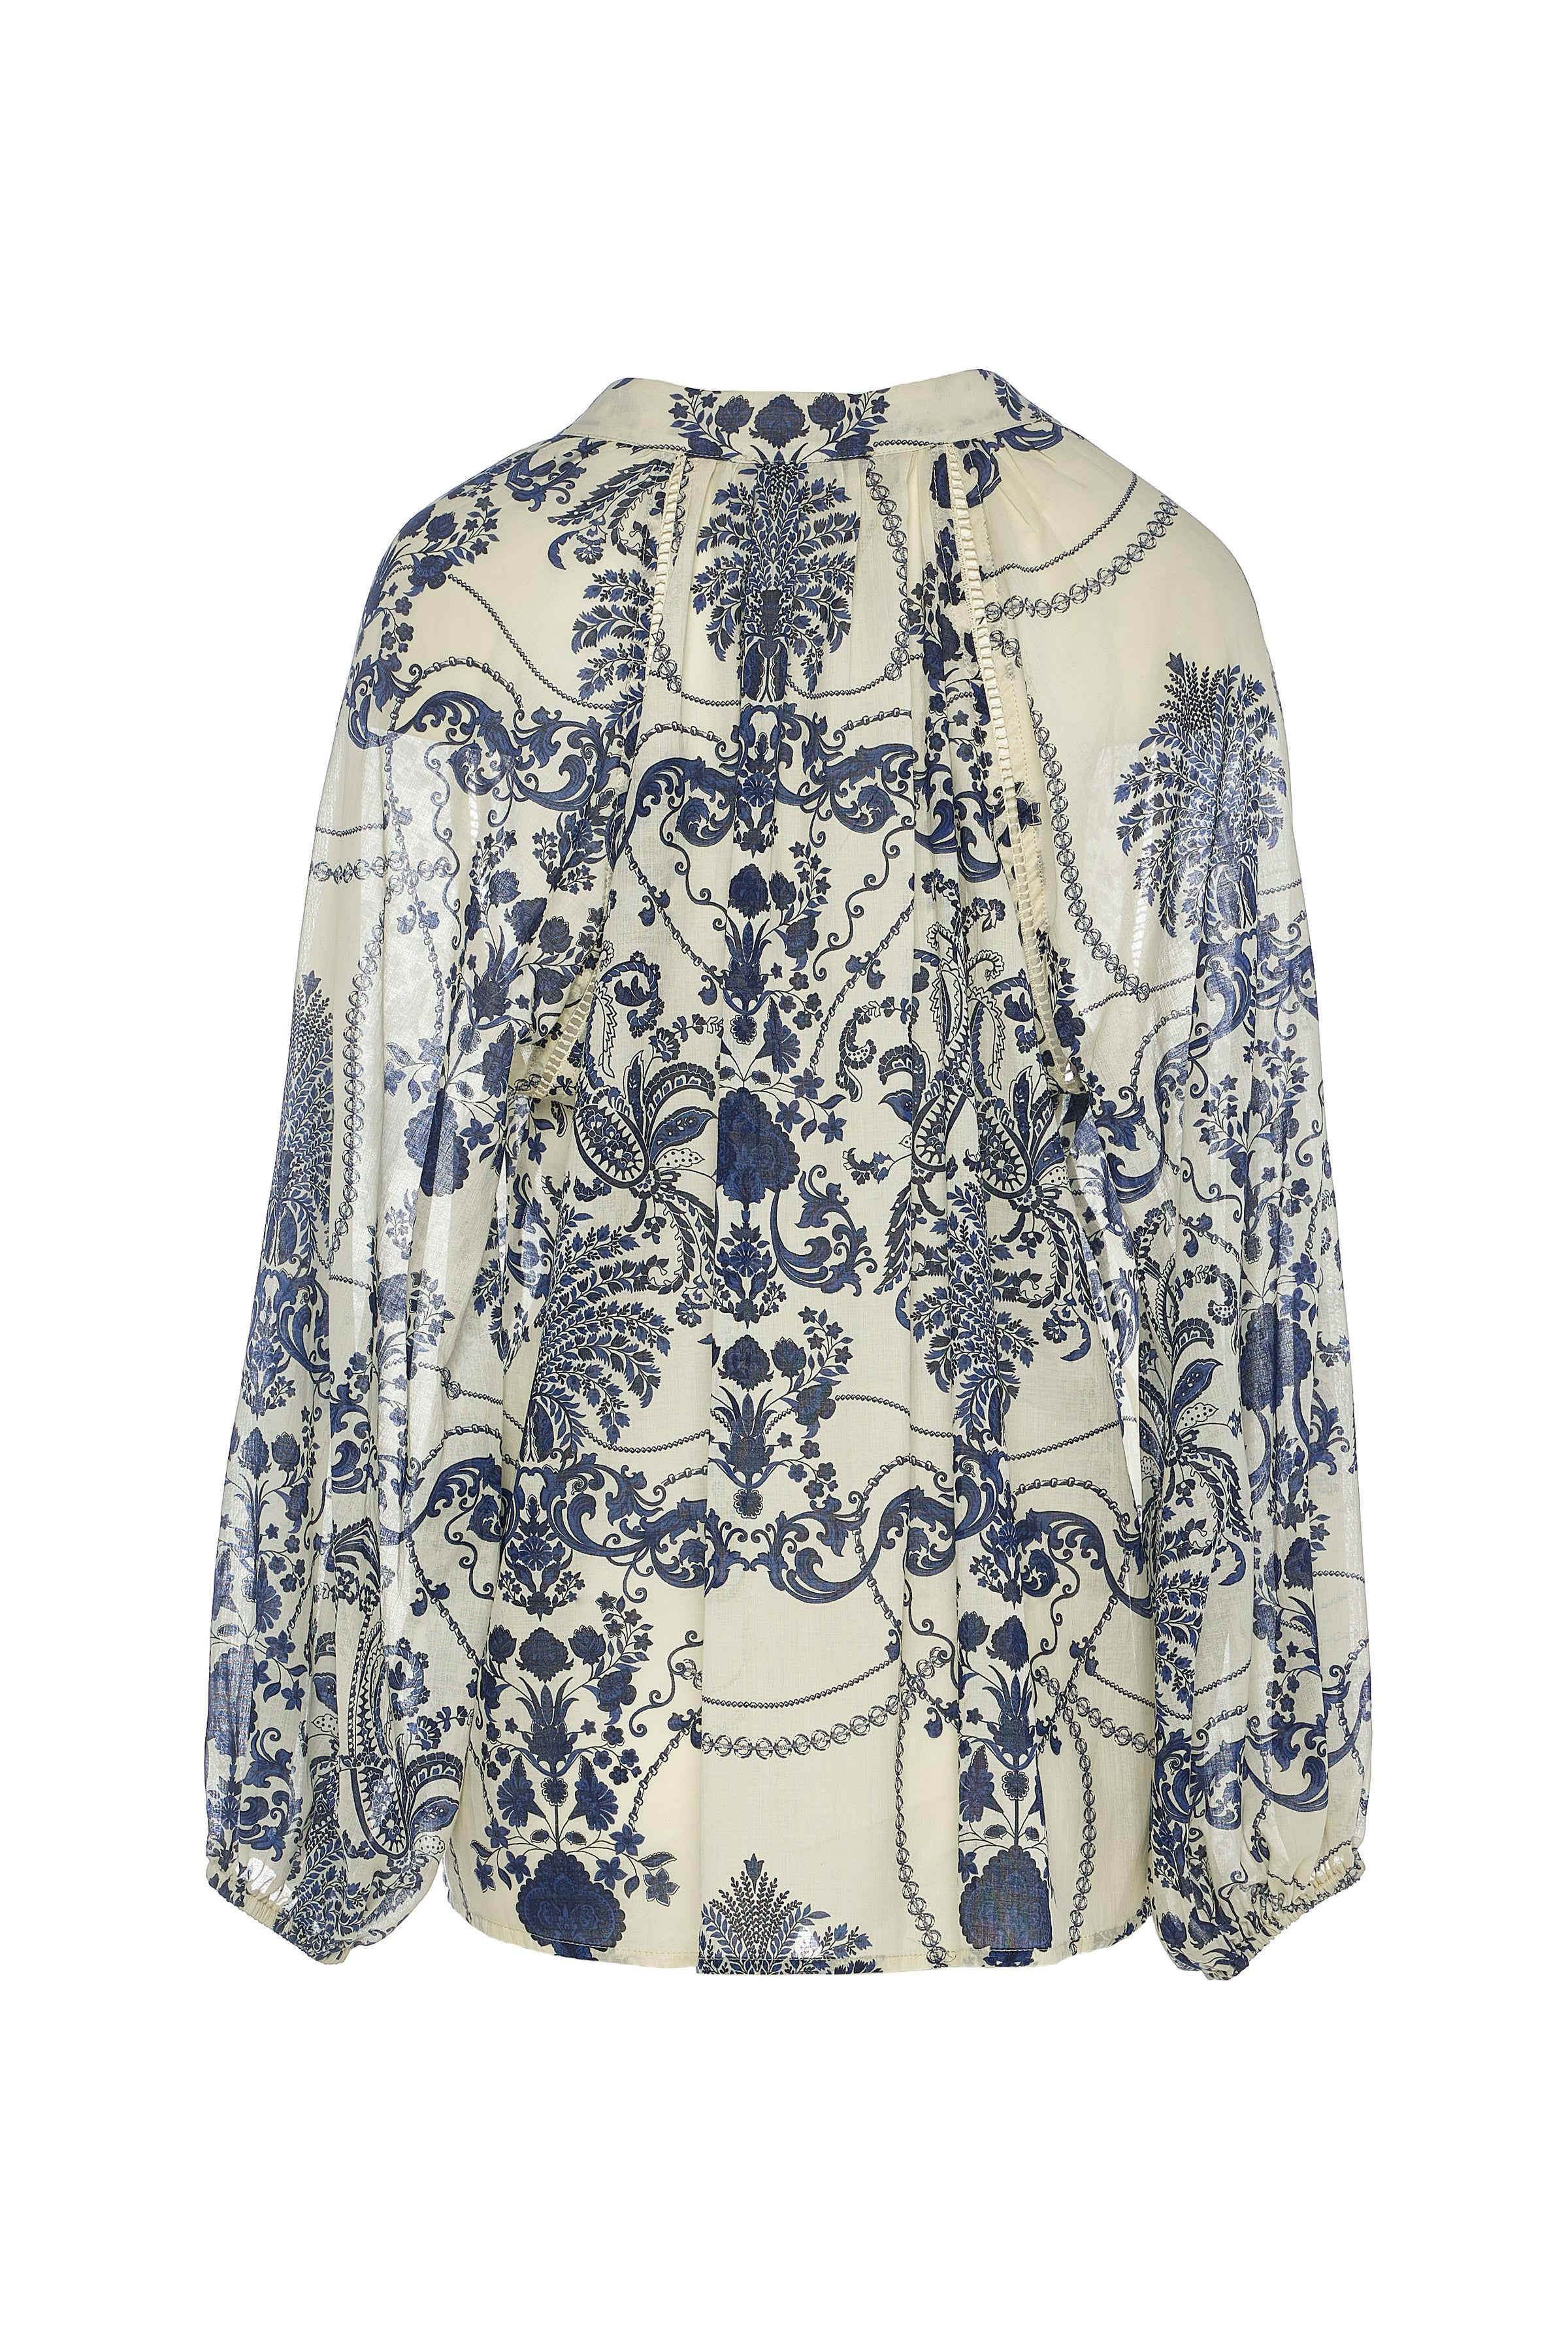 Long sleeved willow pattern inspired top with half placket and covered button fastening